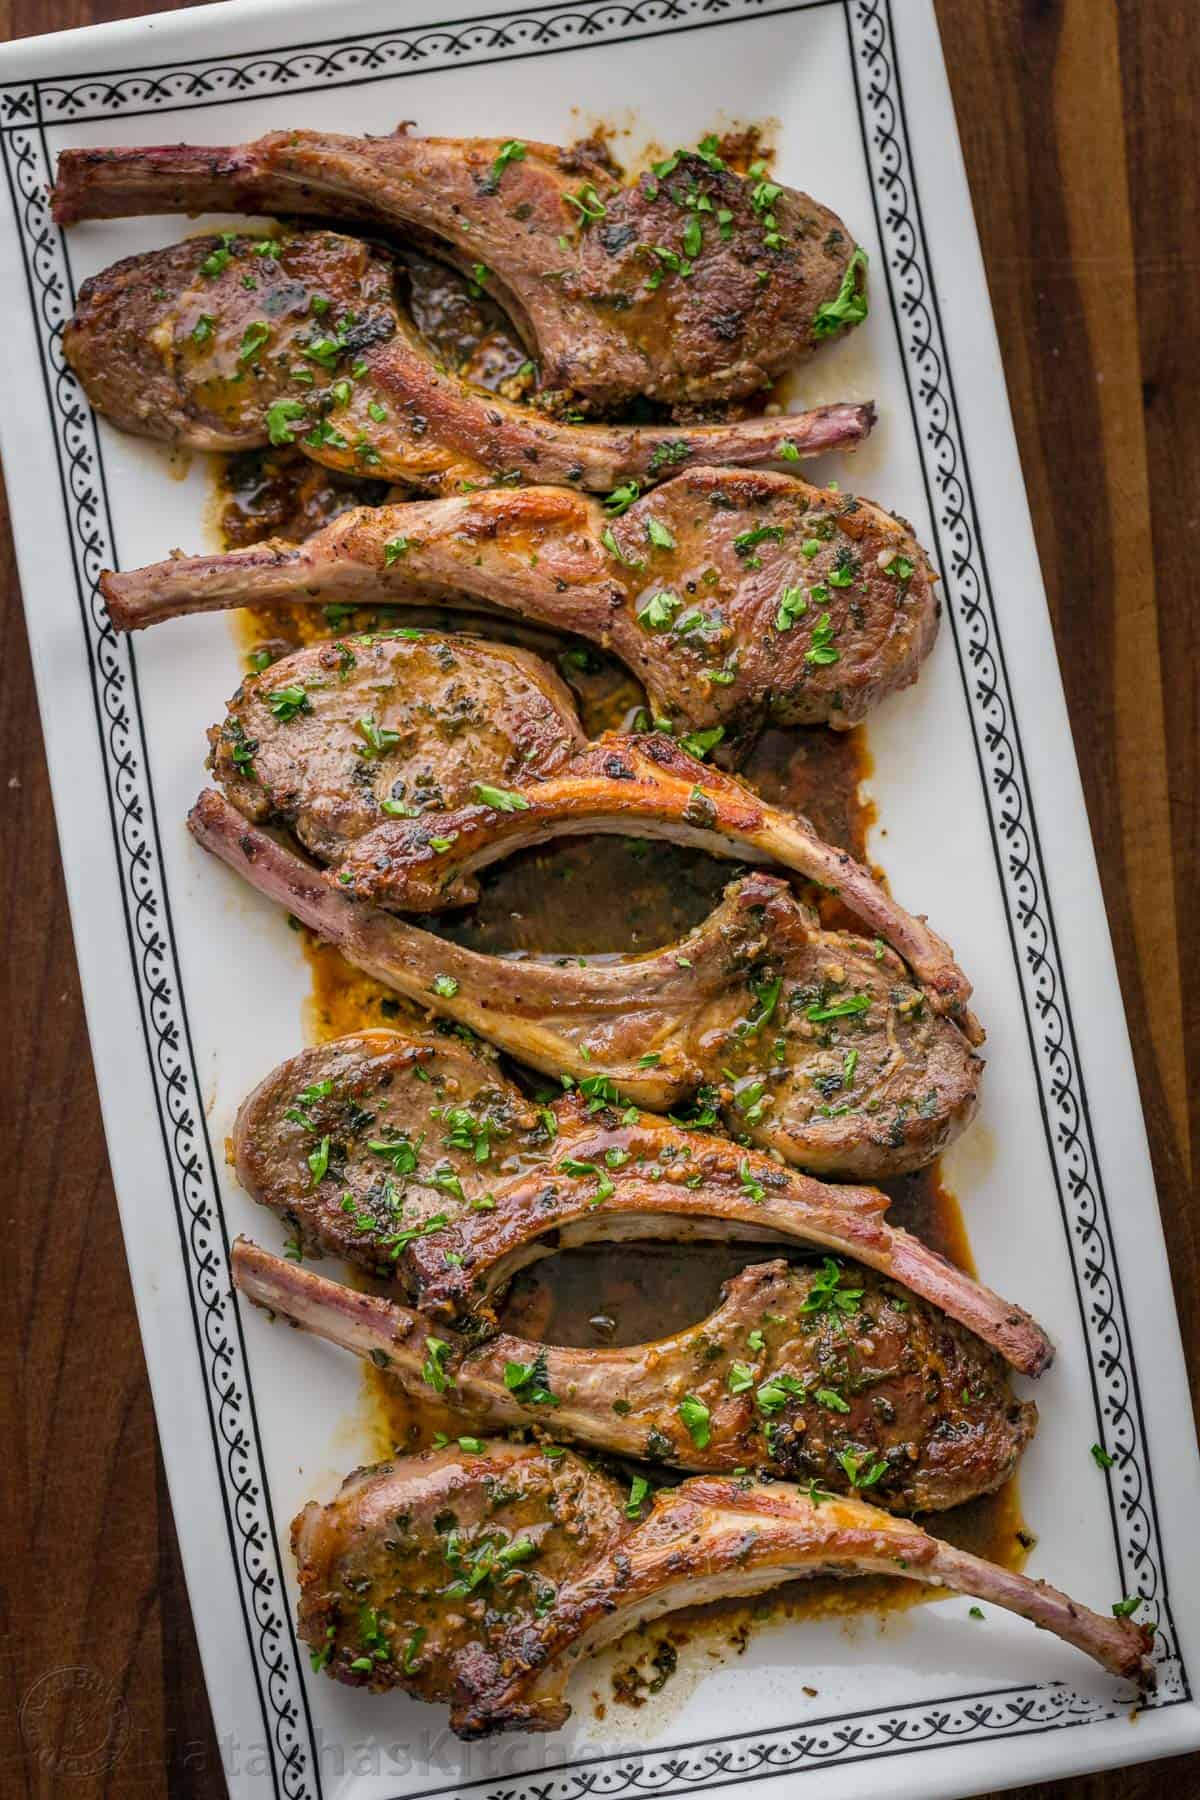 Pan seared lamb chops arranged on a platter served with pan sauce